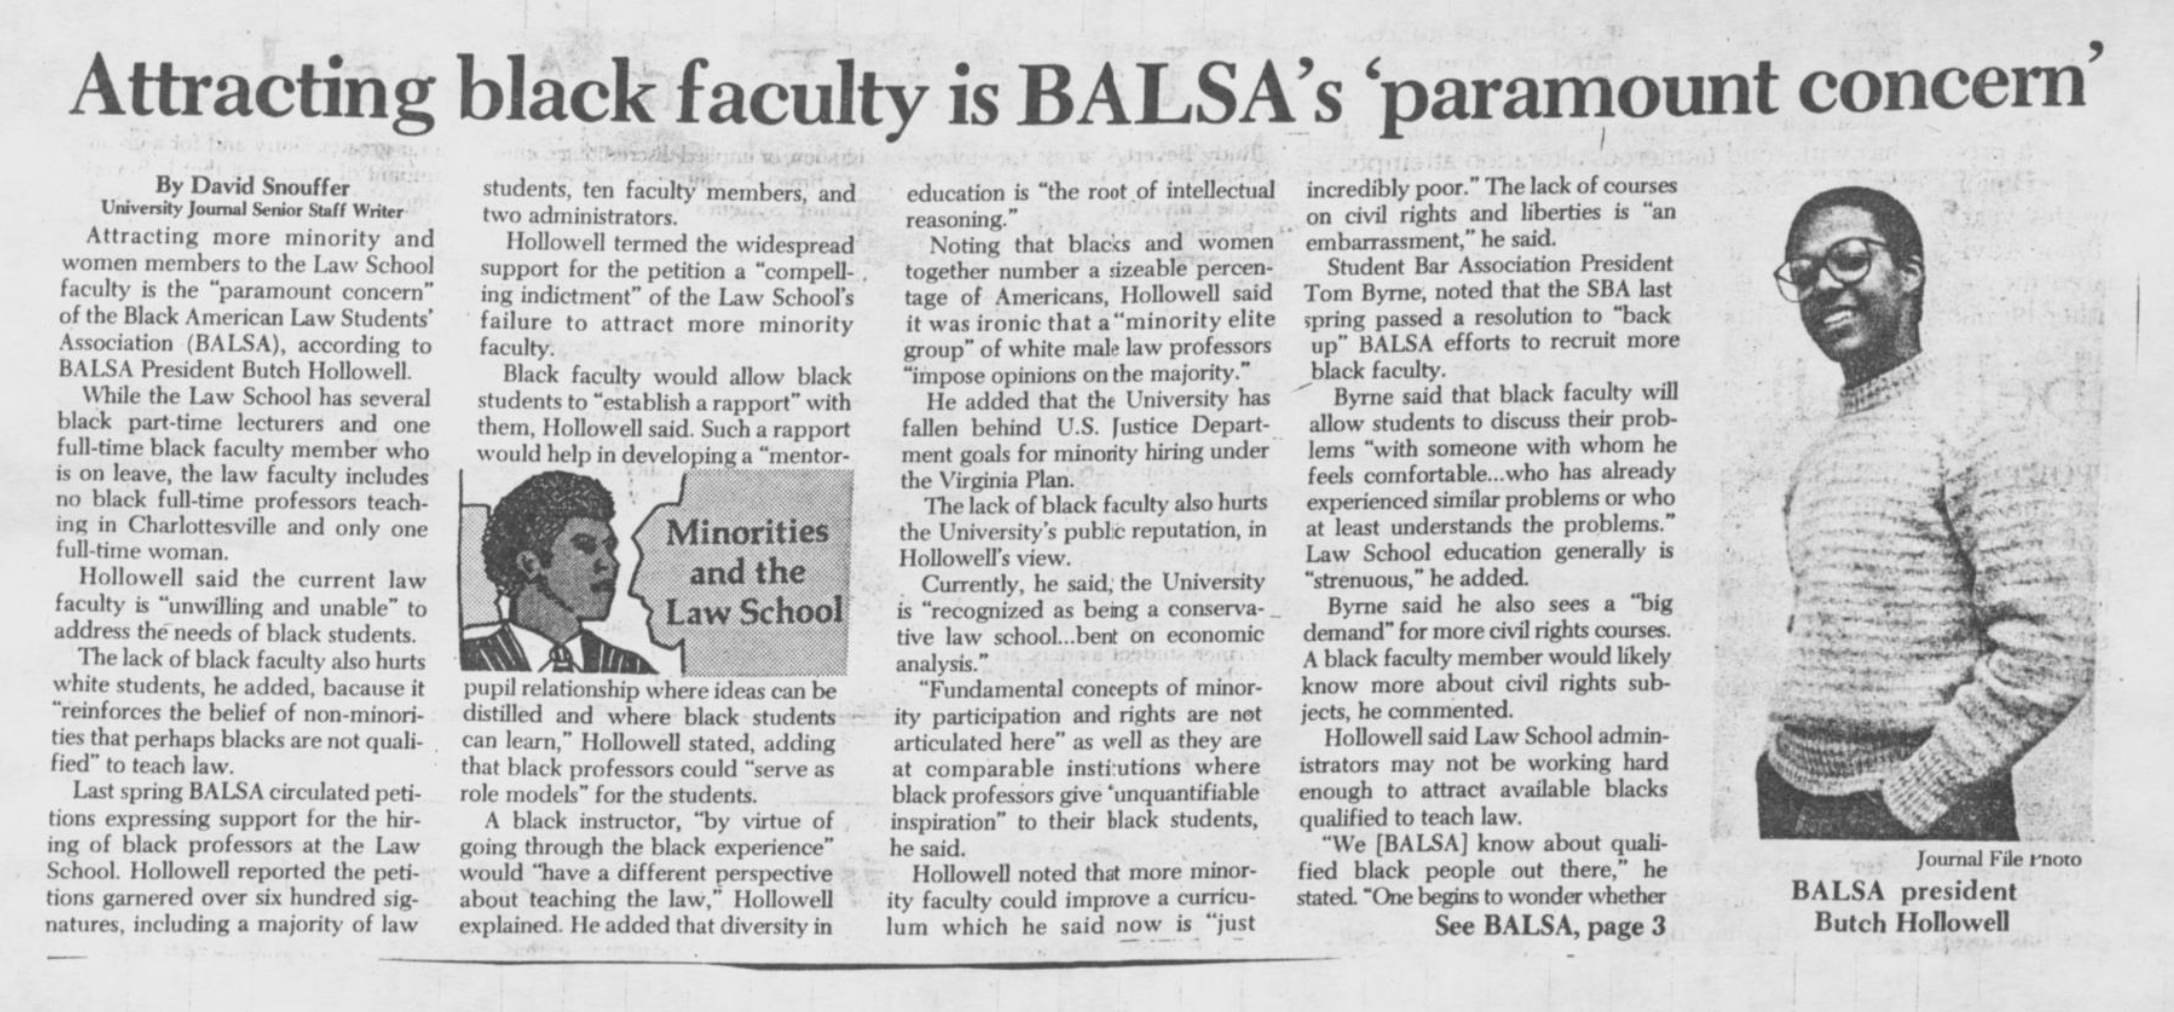 VLW article on attracting black faculty